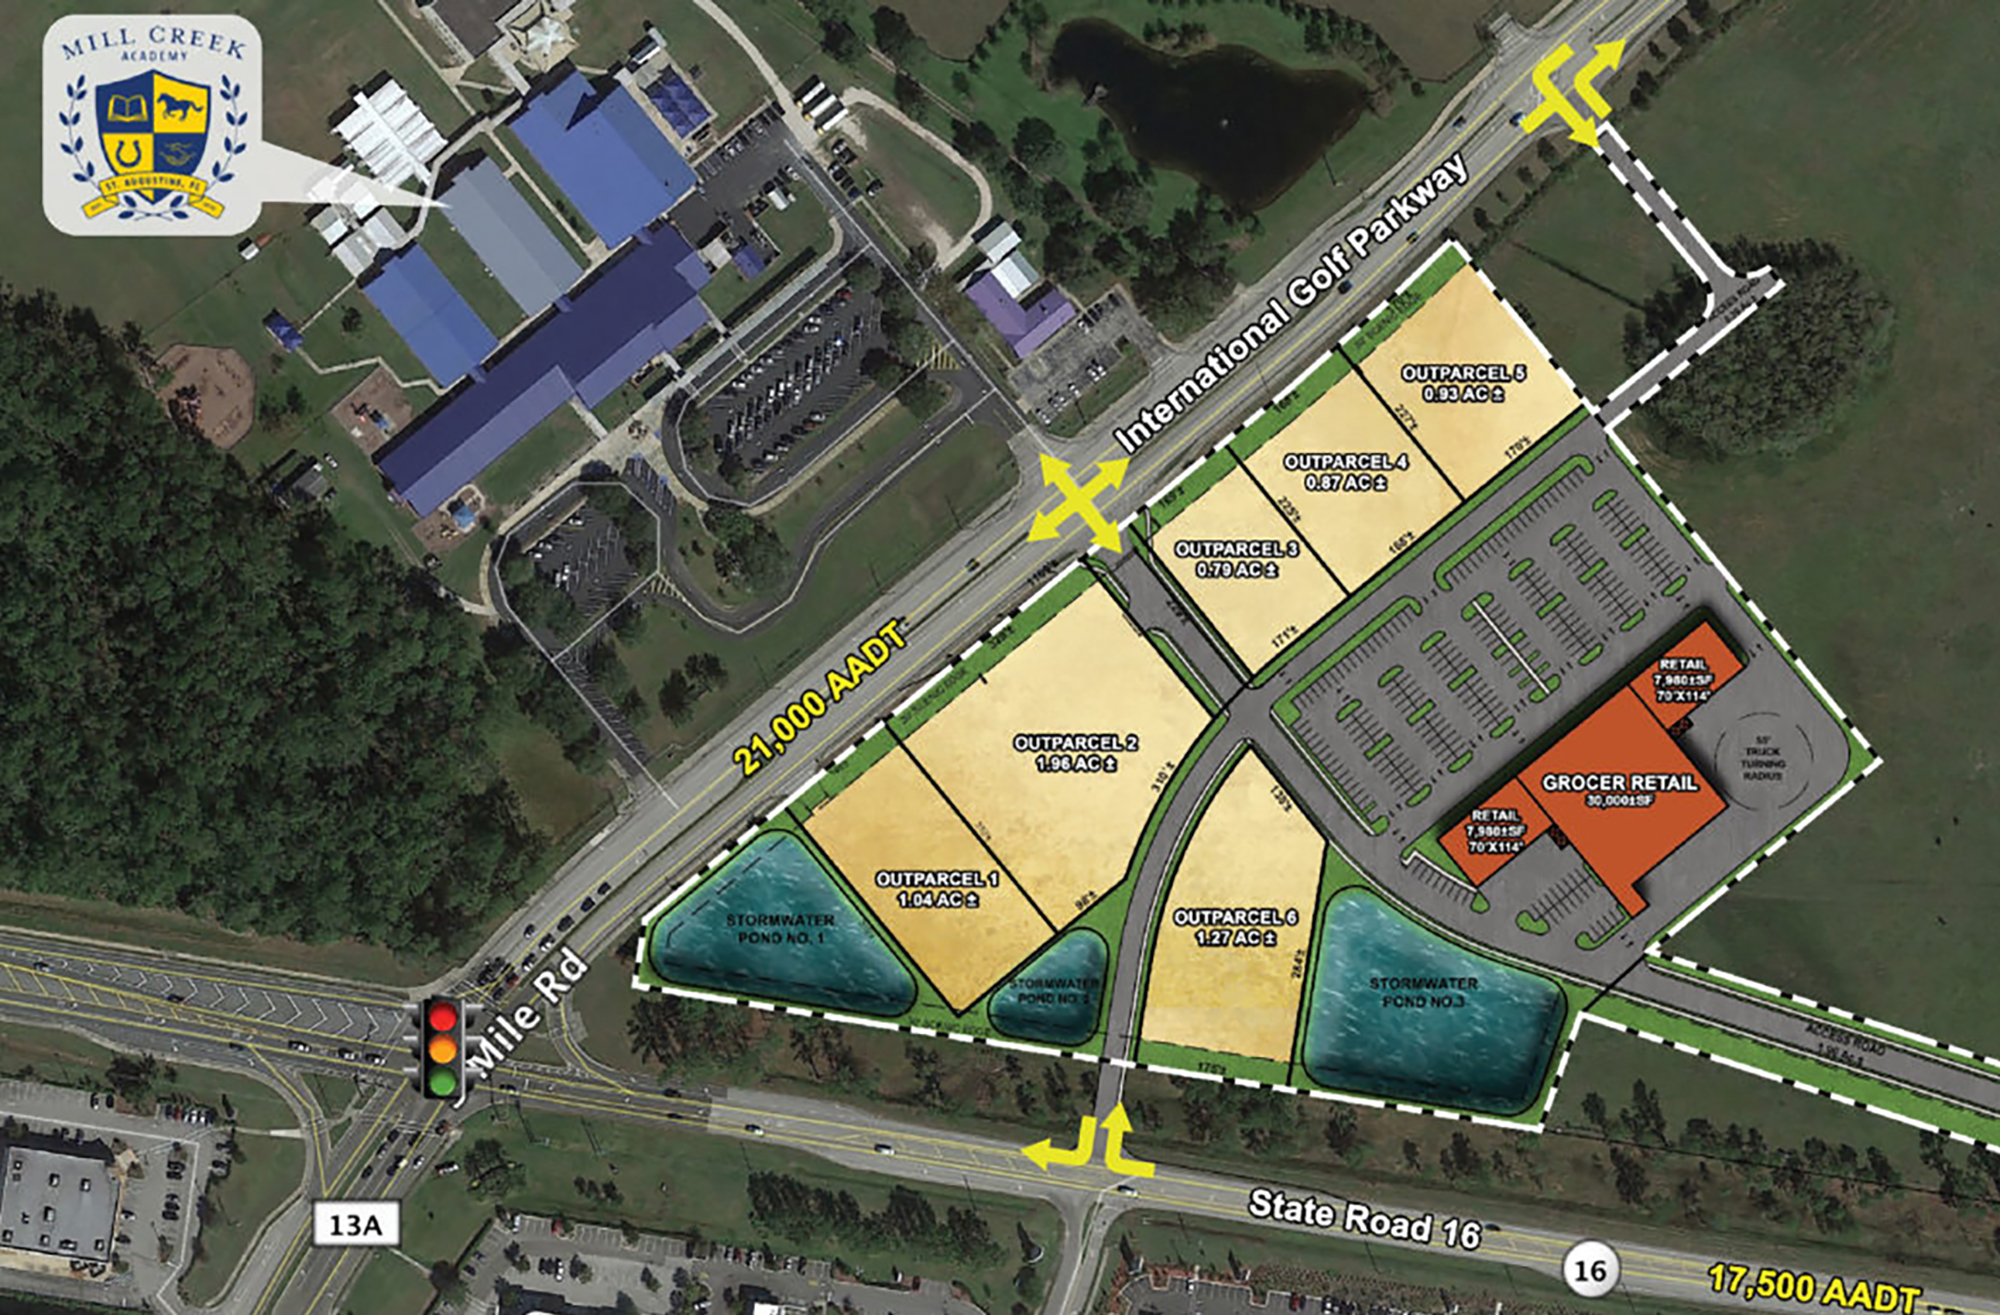 A site plan for the Shoppes at World Commerce Center show a grocery retail store at northeast International Golf Parkway and Florida 16. St. Johns County documents indicate it will be a Publix GreenWise Market.